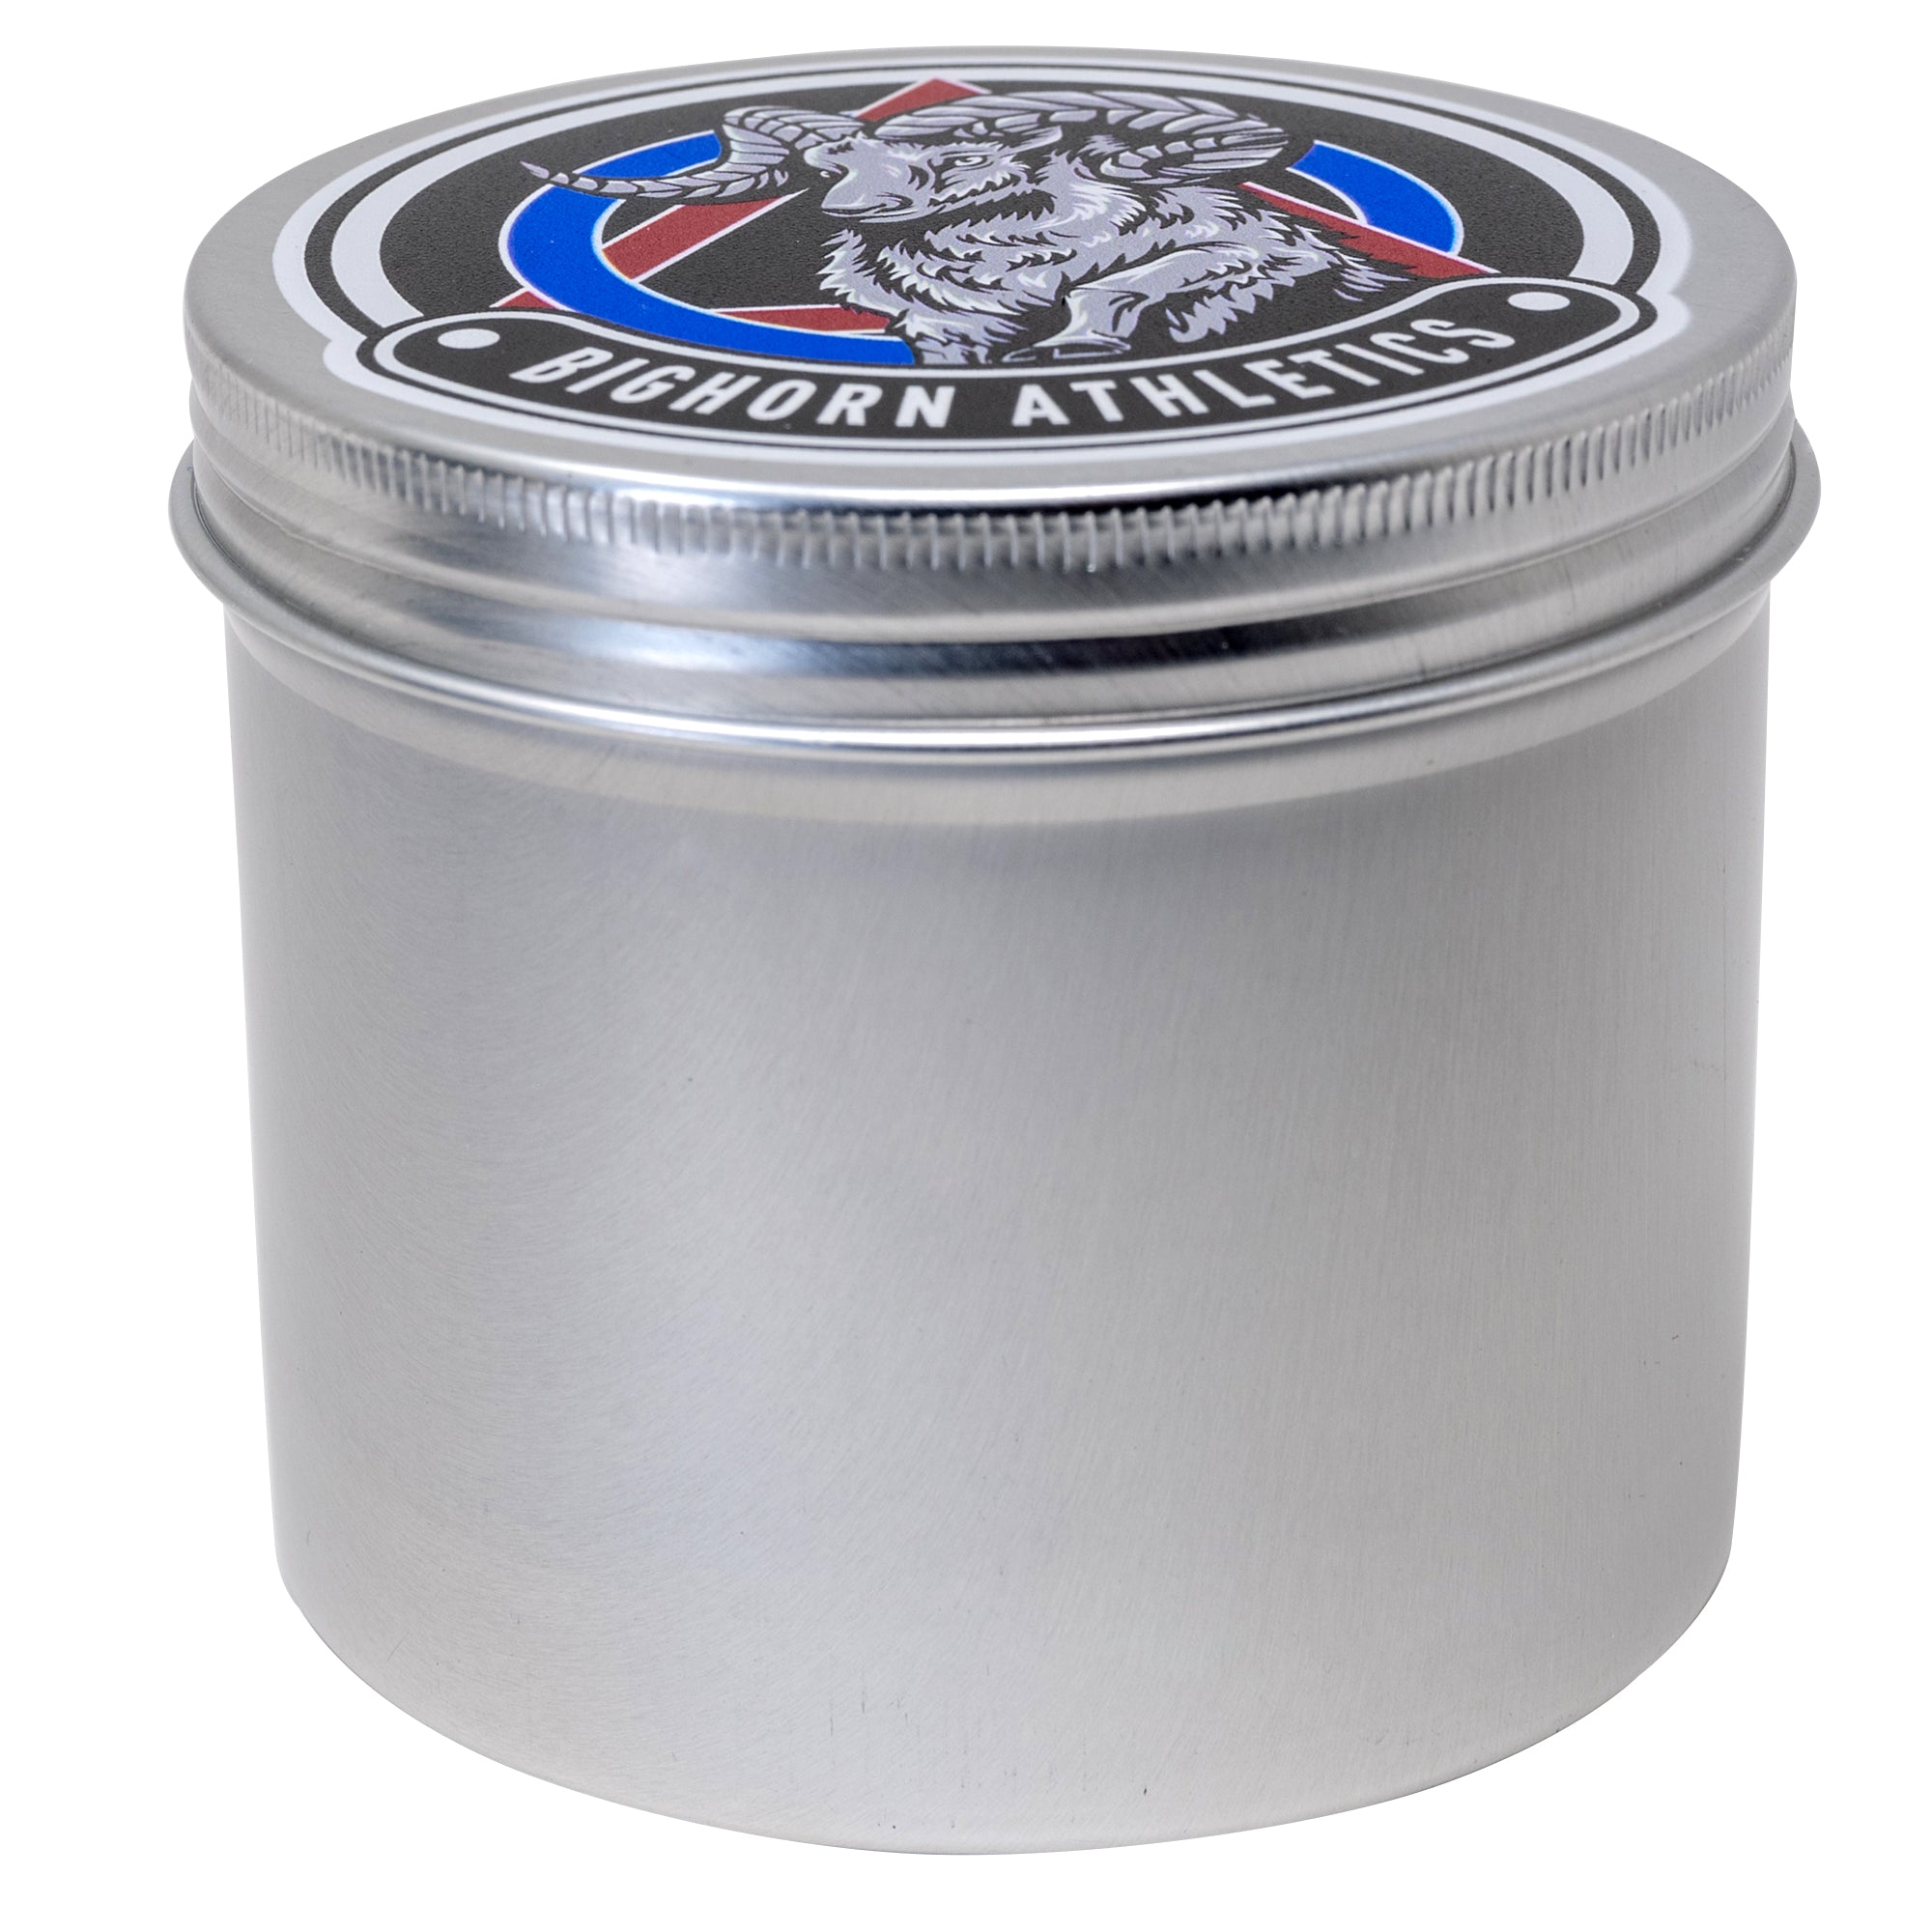 Pro-Series Silver Tin Can Holder, Medium - Tape Not Included